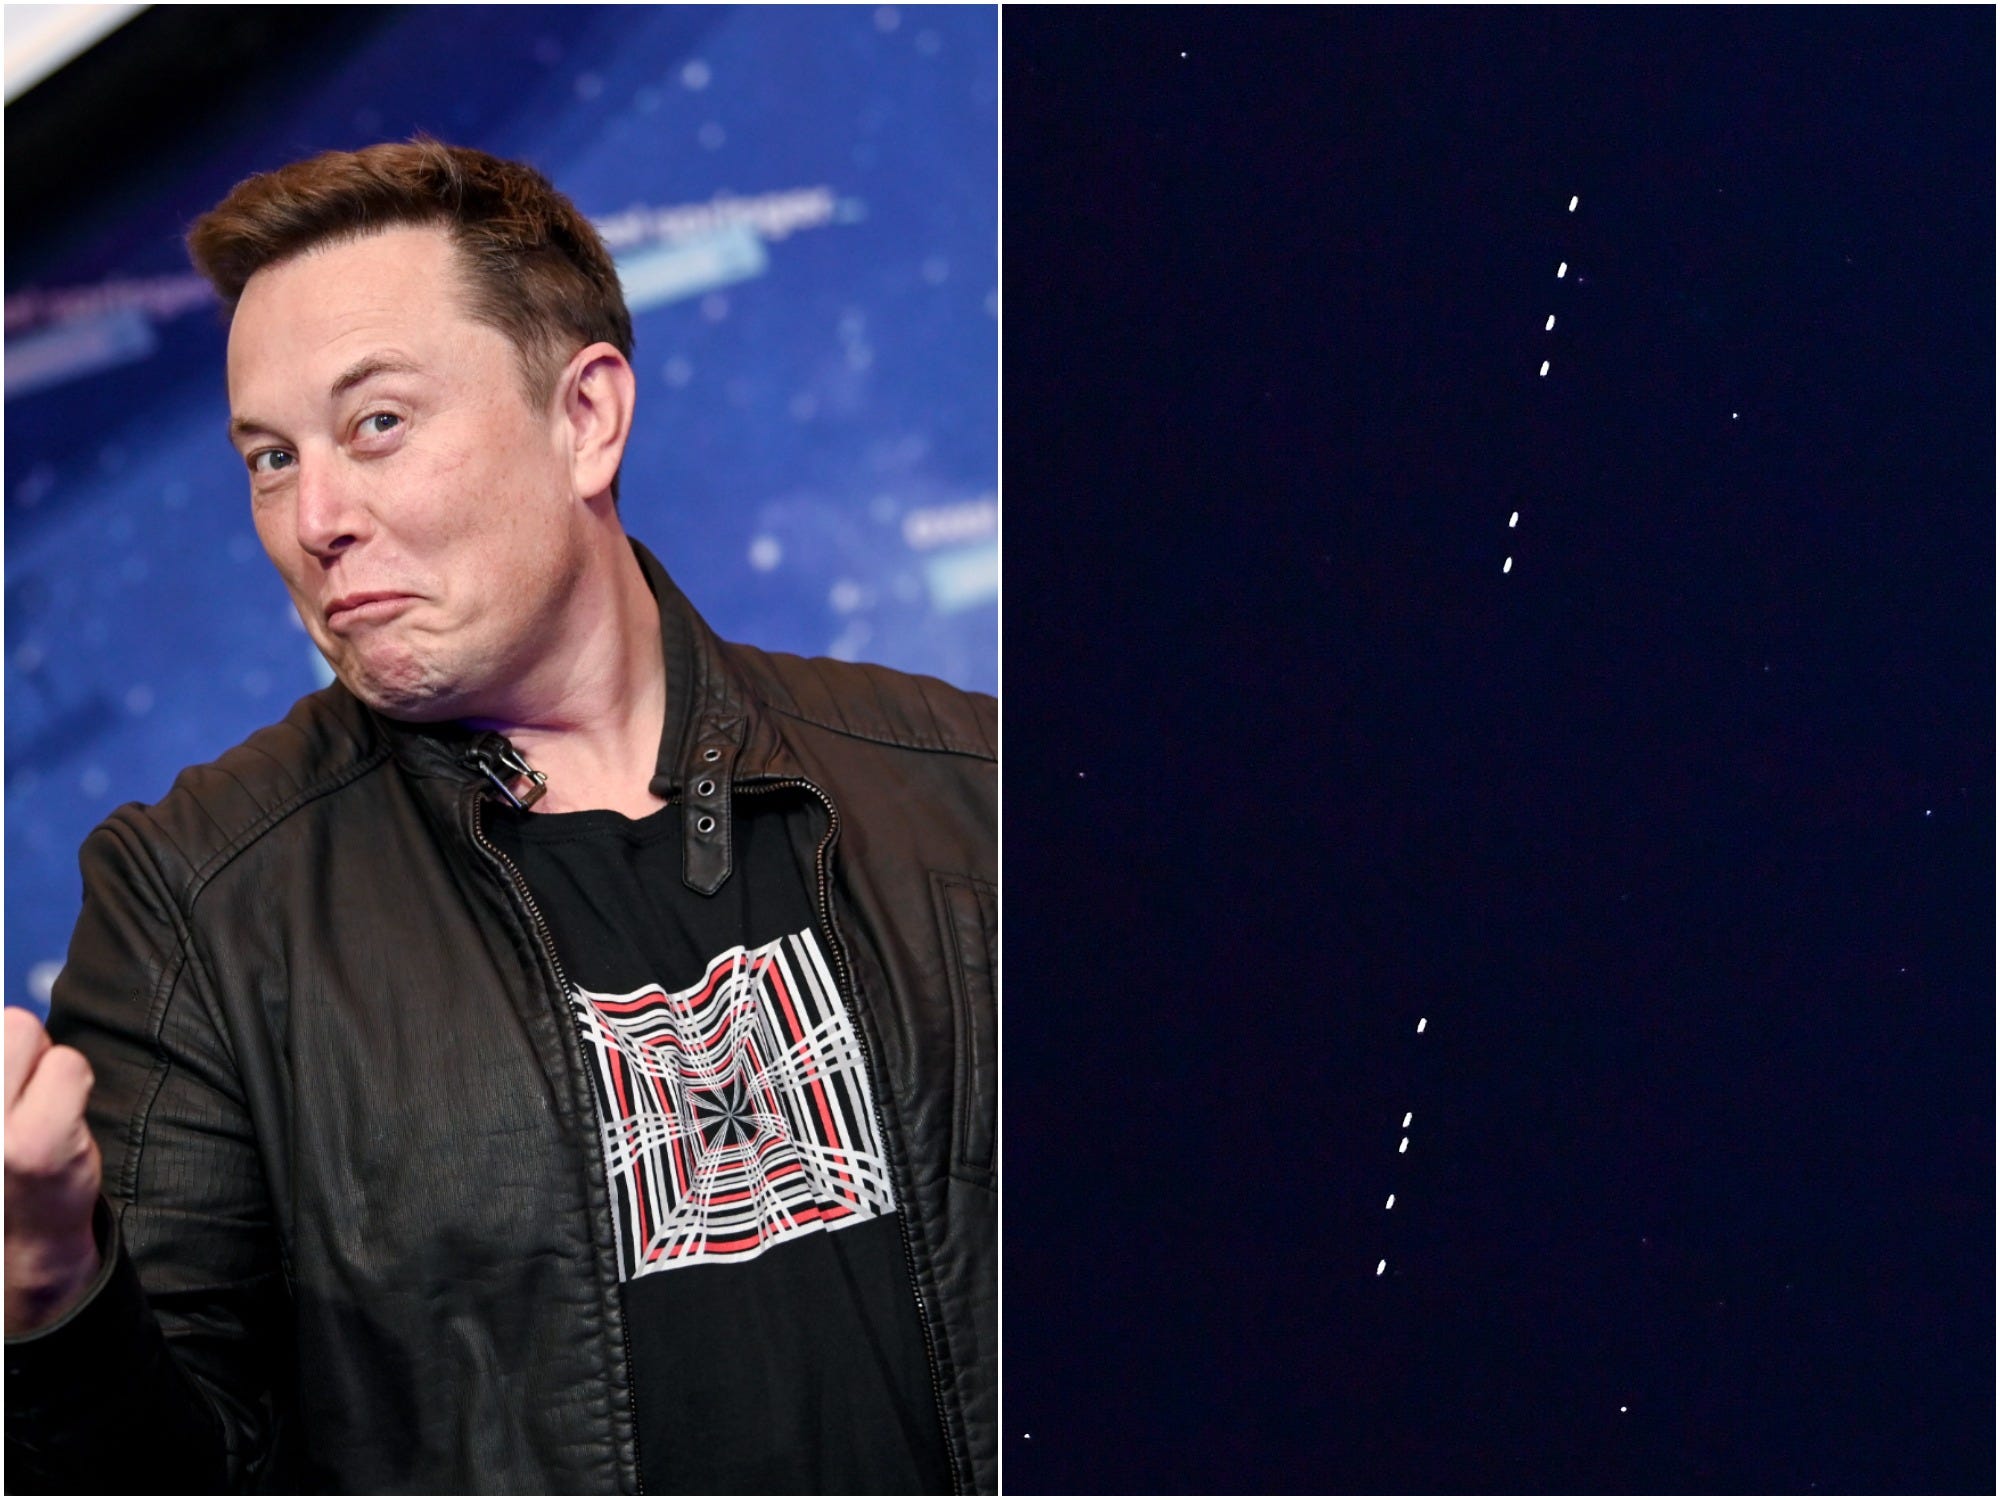 SpaceX CEO Elon Musk next to a picture of Starlink satellites in the night sky